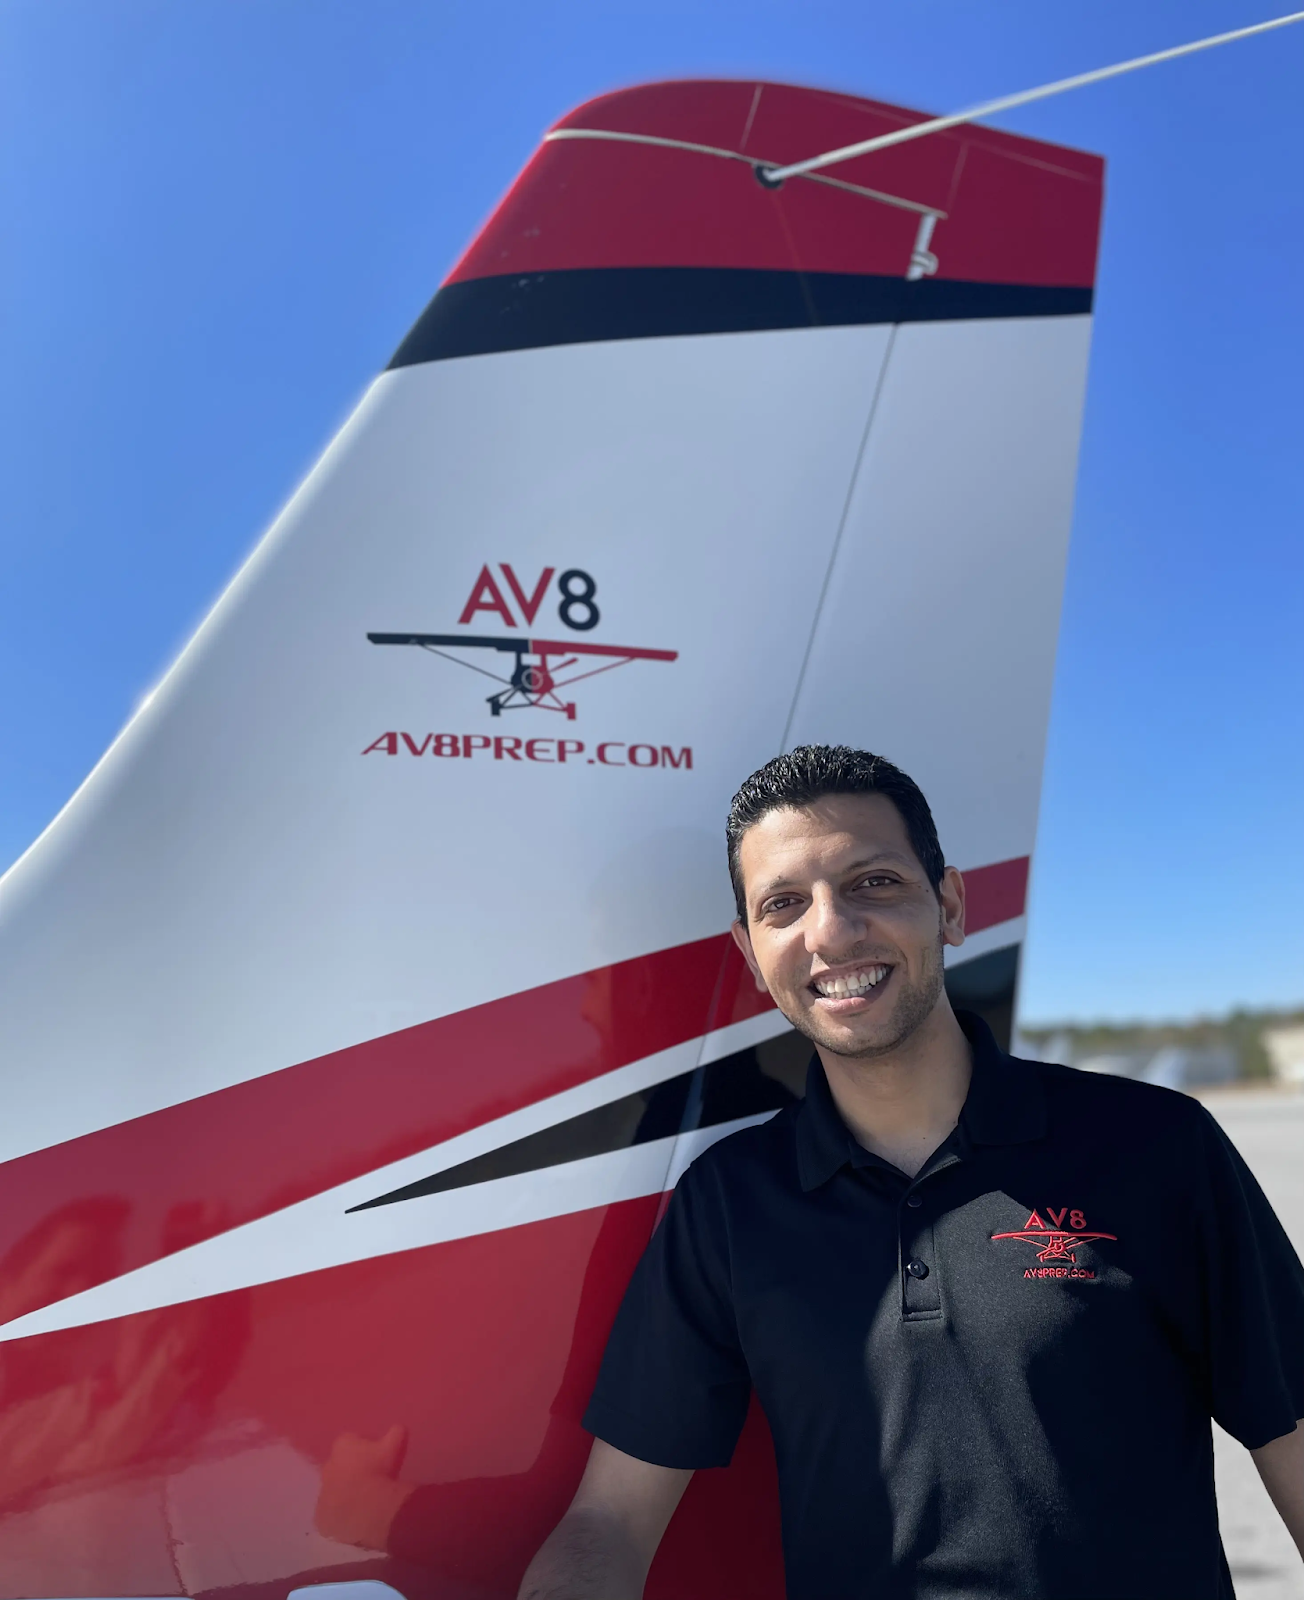 AV8 Prep is an online ground school offering a wide range of private pilot ground school courses.